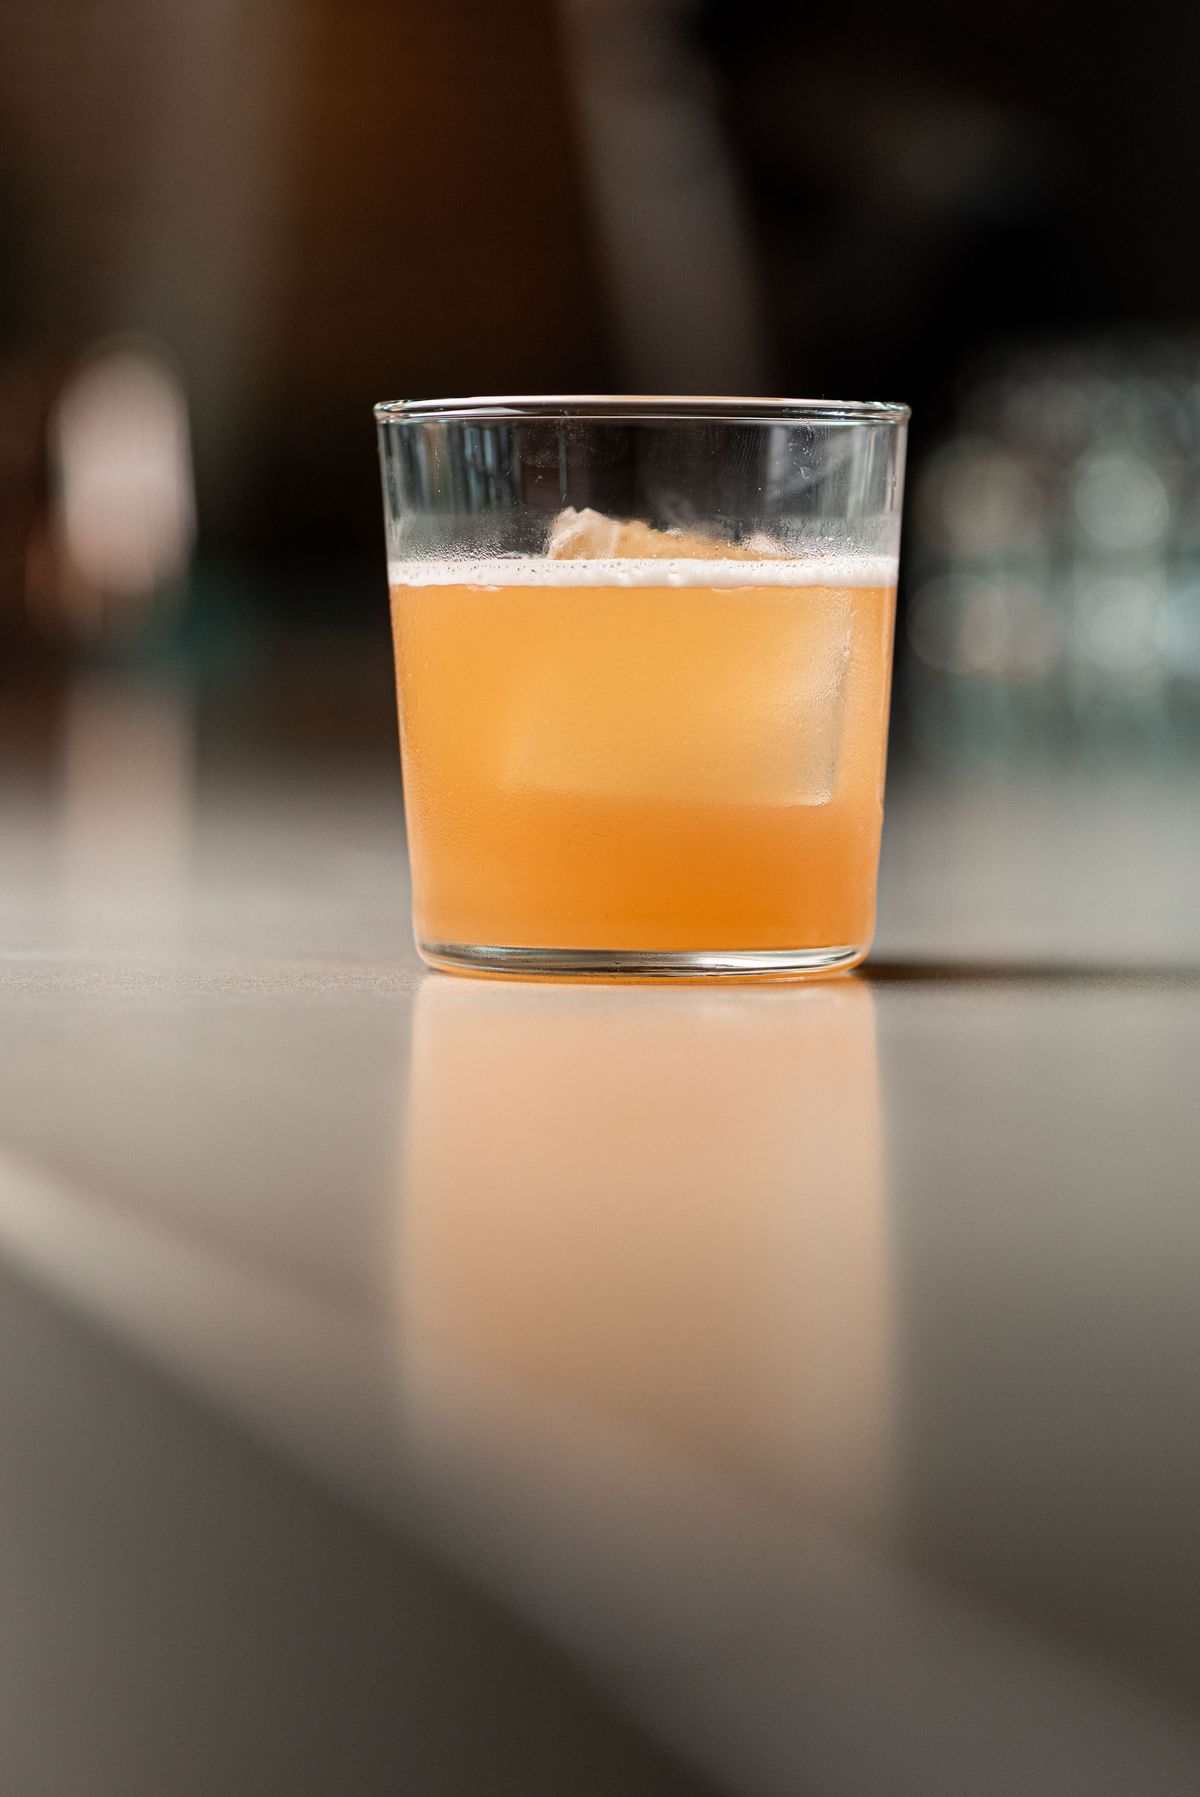 A light orange cocktail in a tall glass shown from the side.